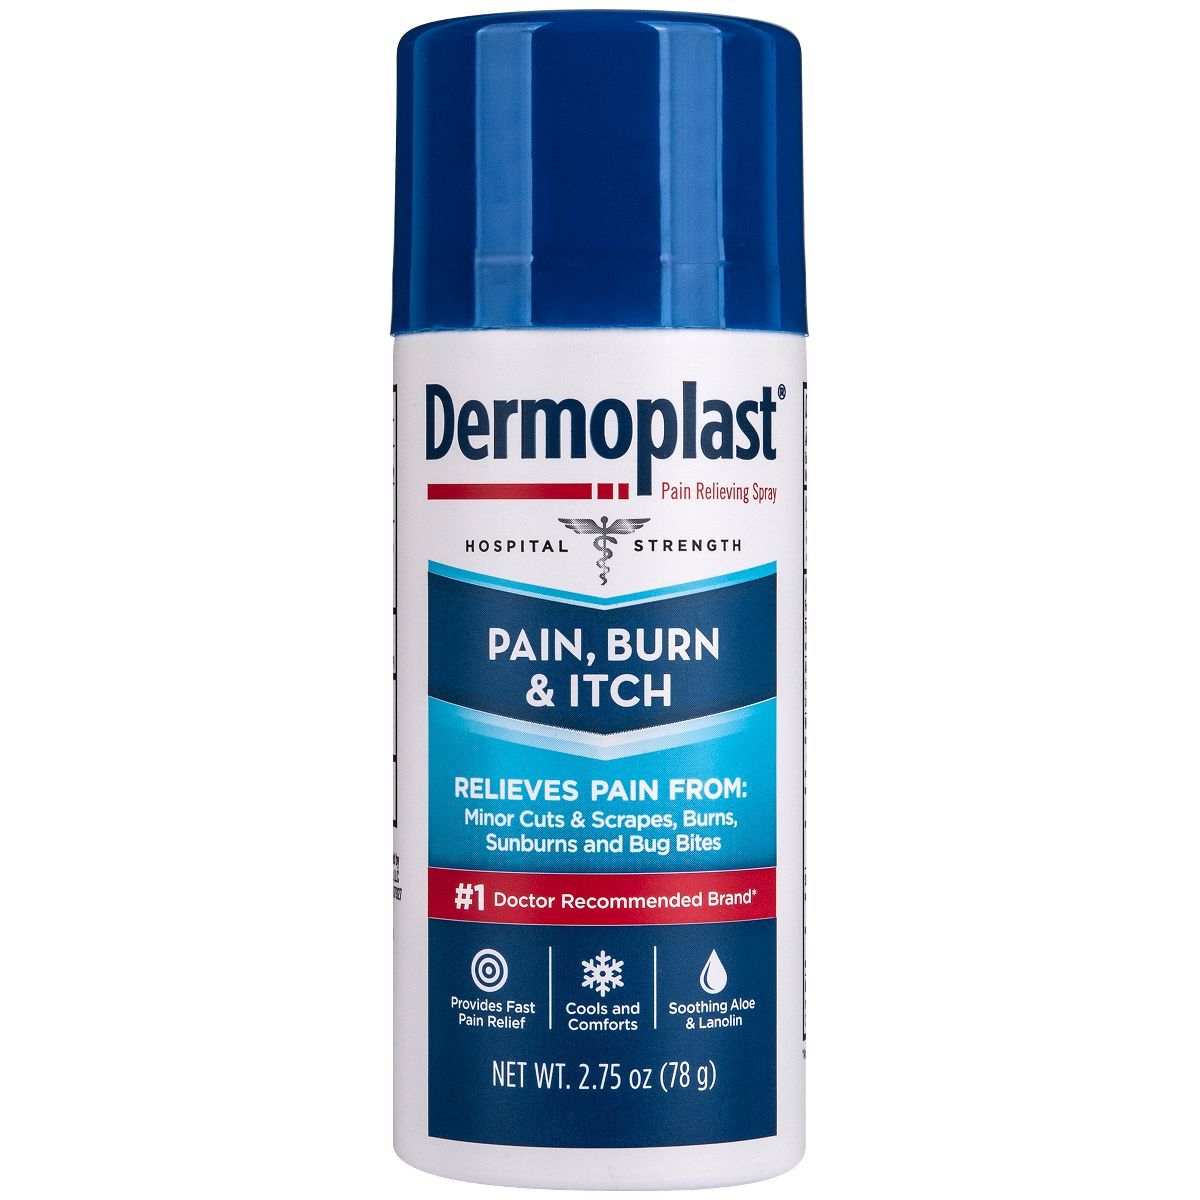 Dermoplast Pain Relief Spray for Minor Cuts, Burns and Bug Bites - 2.75oz | Target